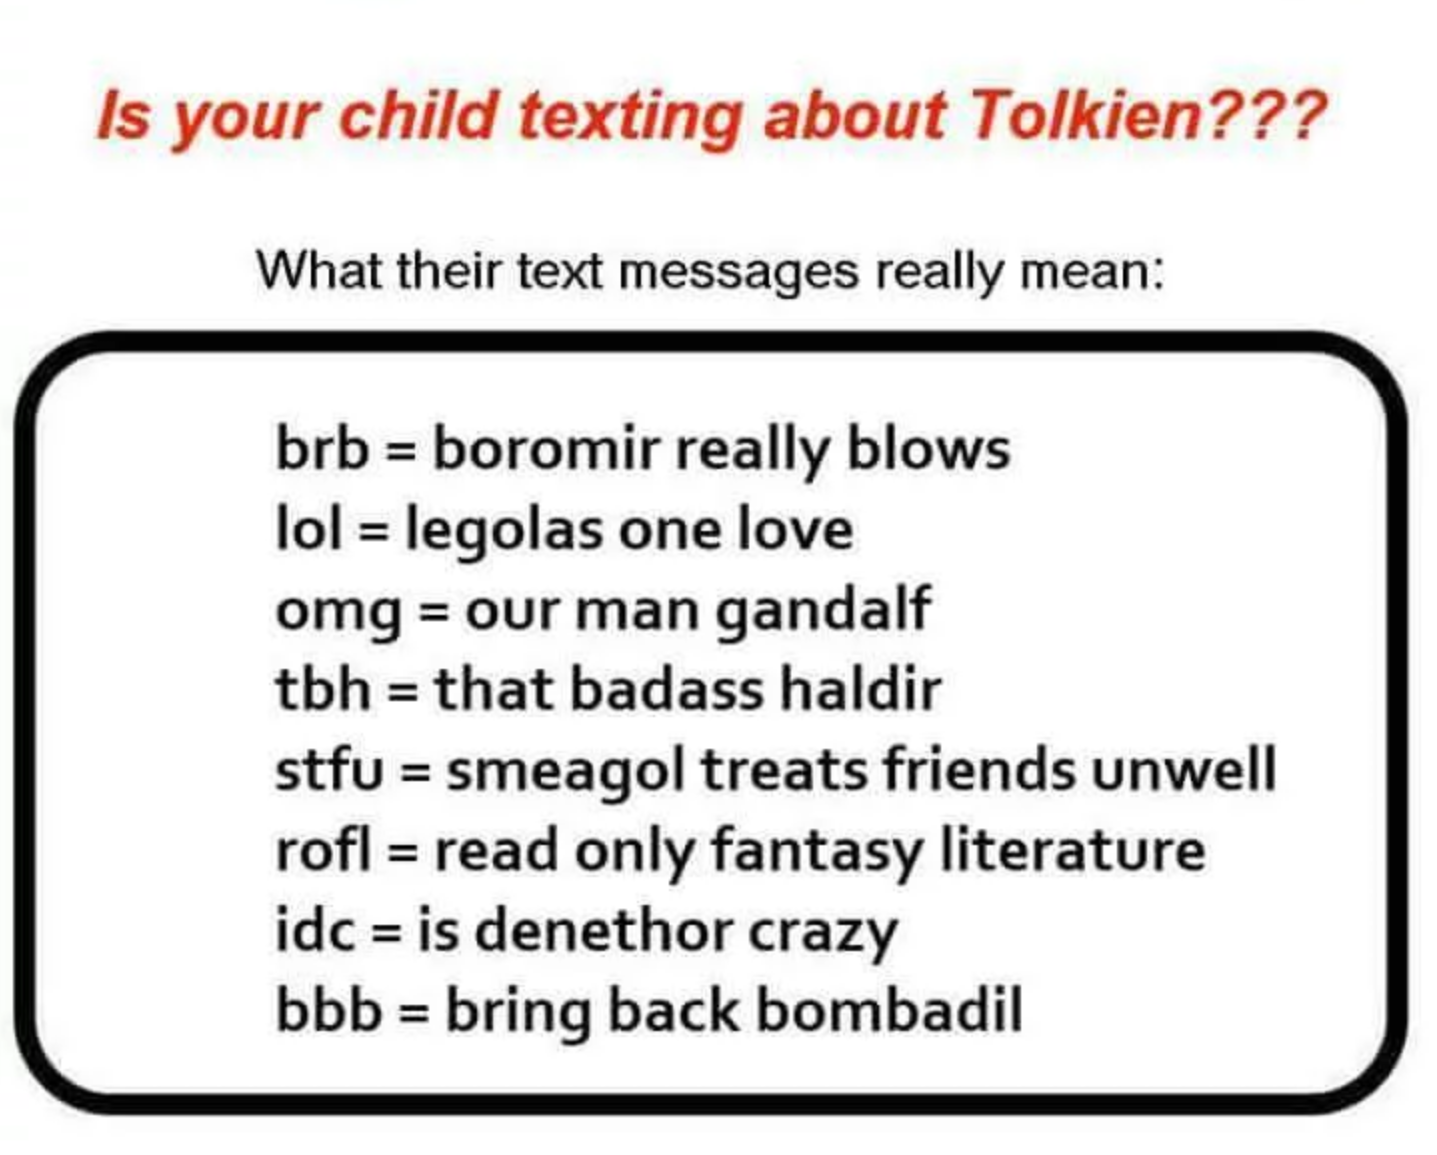 texting+about+tolkien